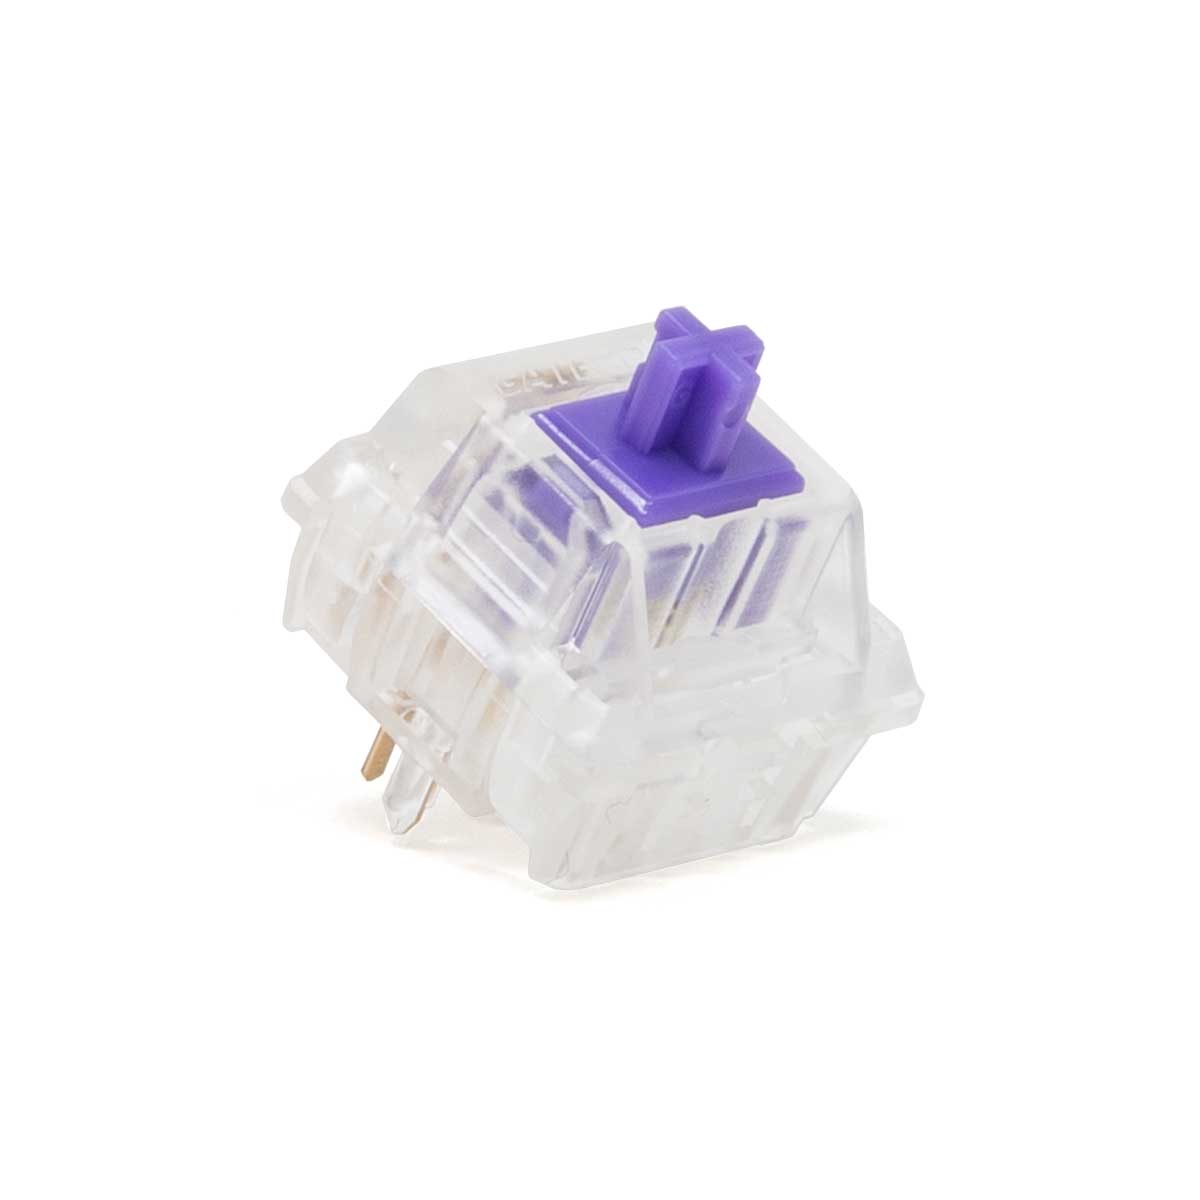 Zeal Zealios V2 Tactile Switches – Divinikey